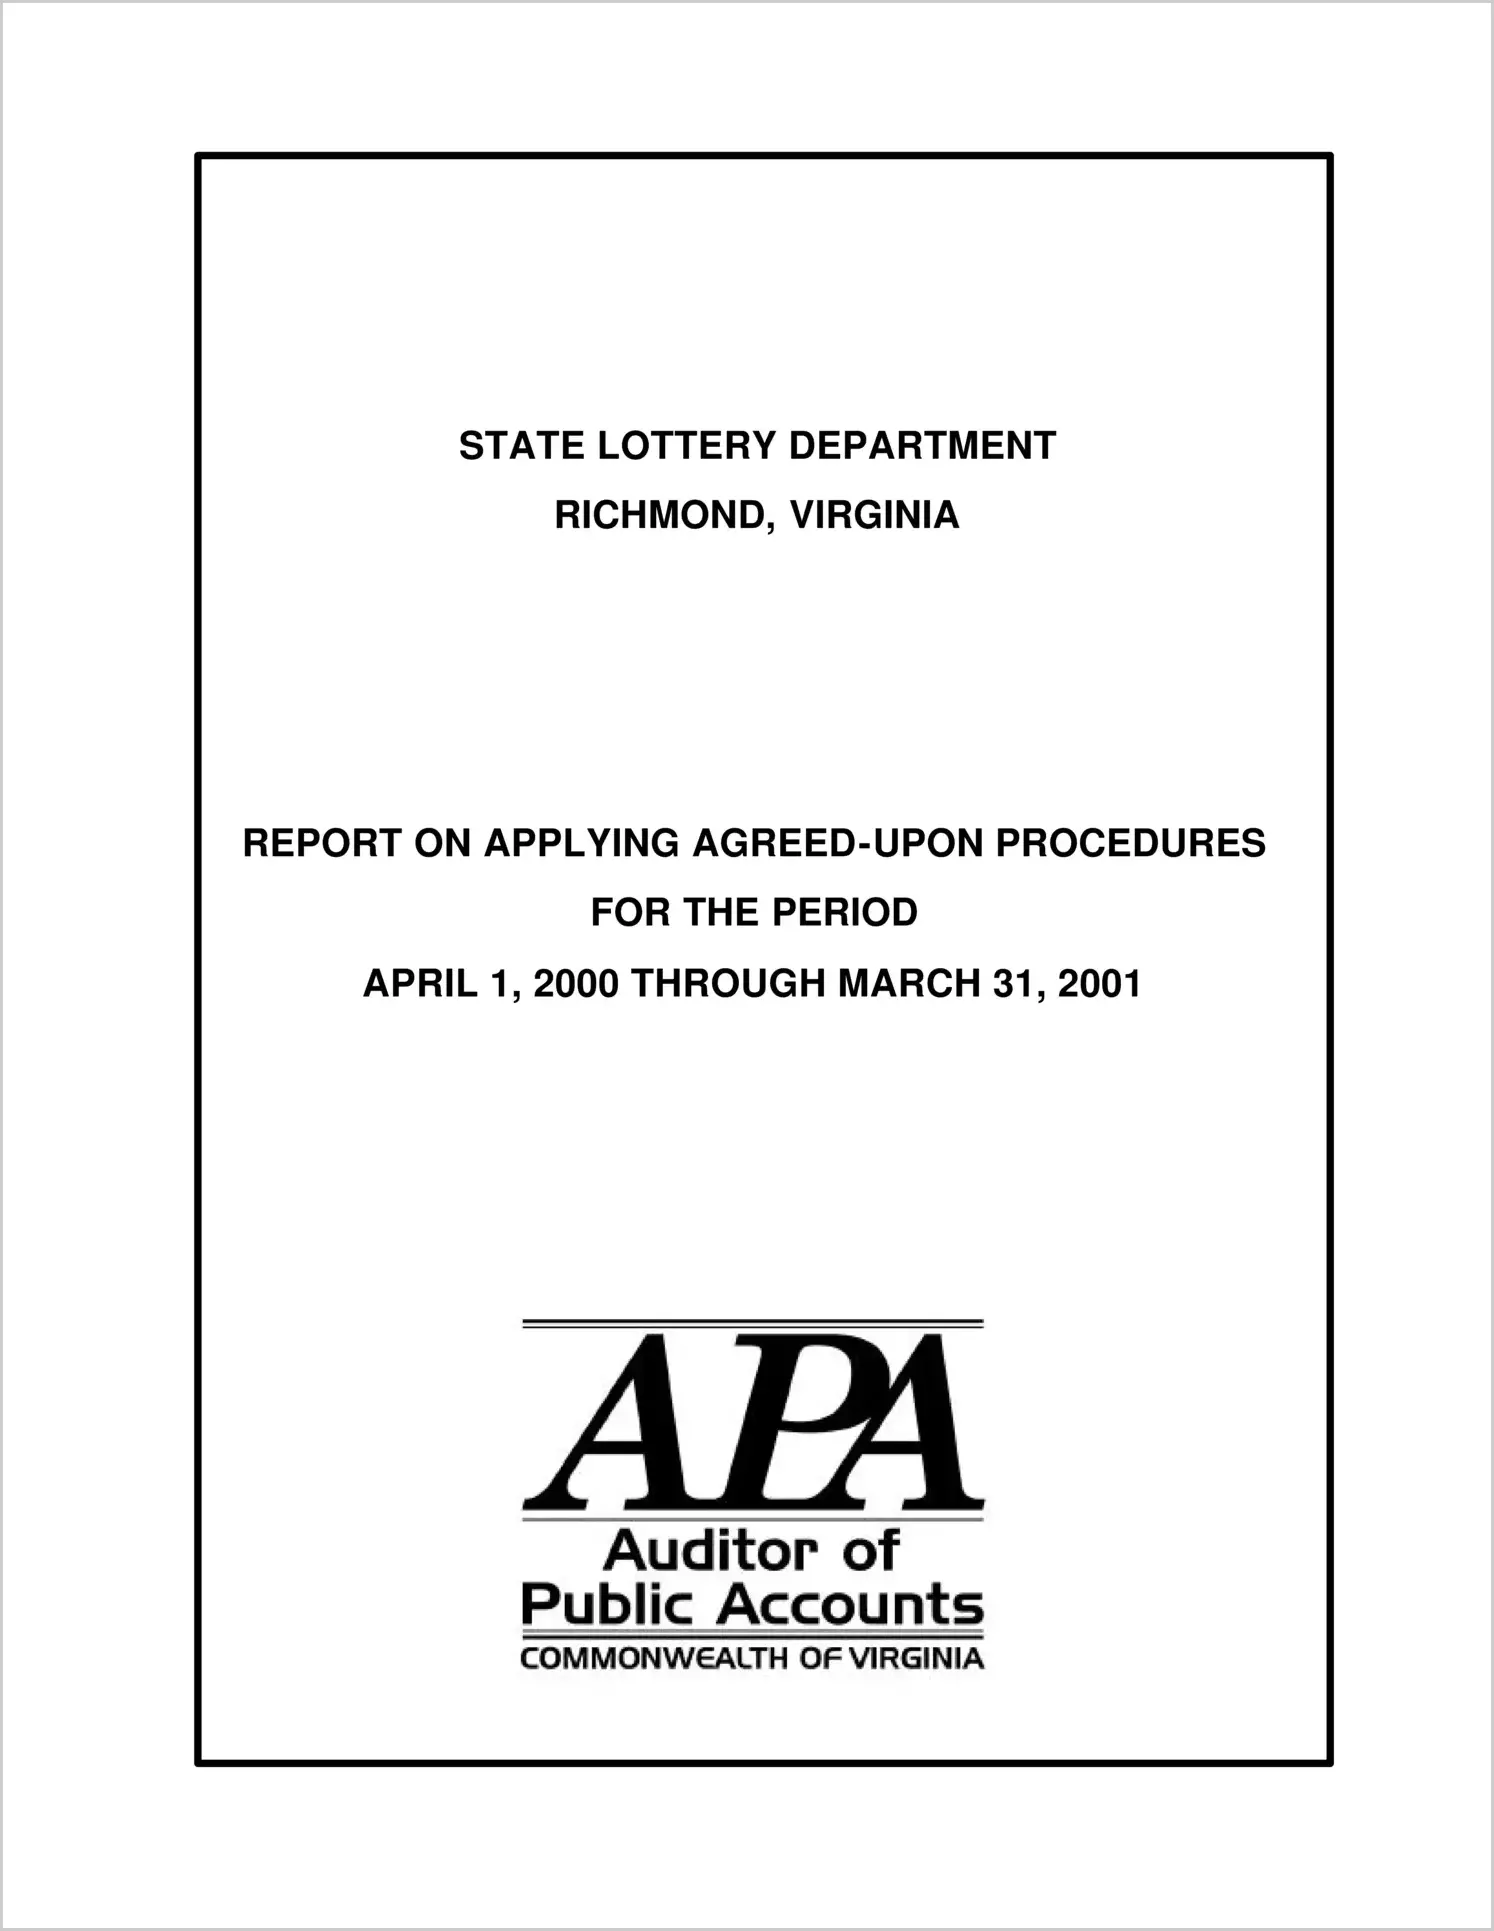 Special ReportState Lottery Department Report on Applying Agreed-Upon Procedures (Big Game)(Report Period 4/1/2000 - 3/31/2001)